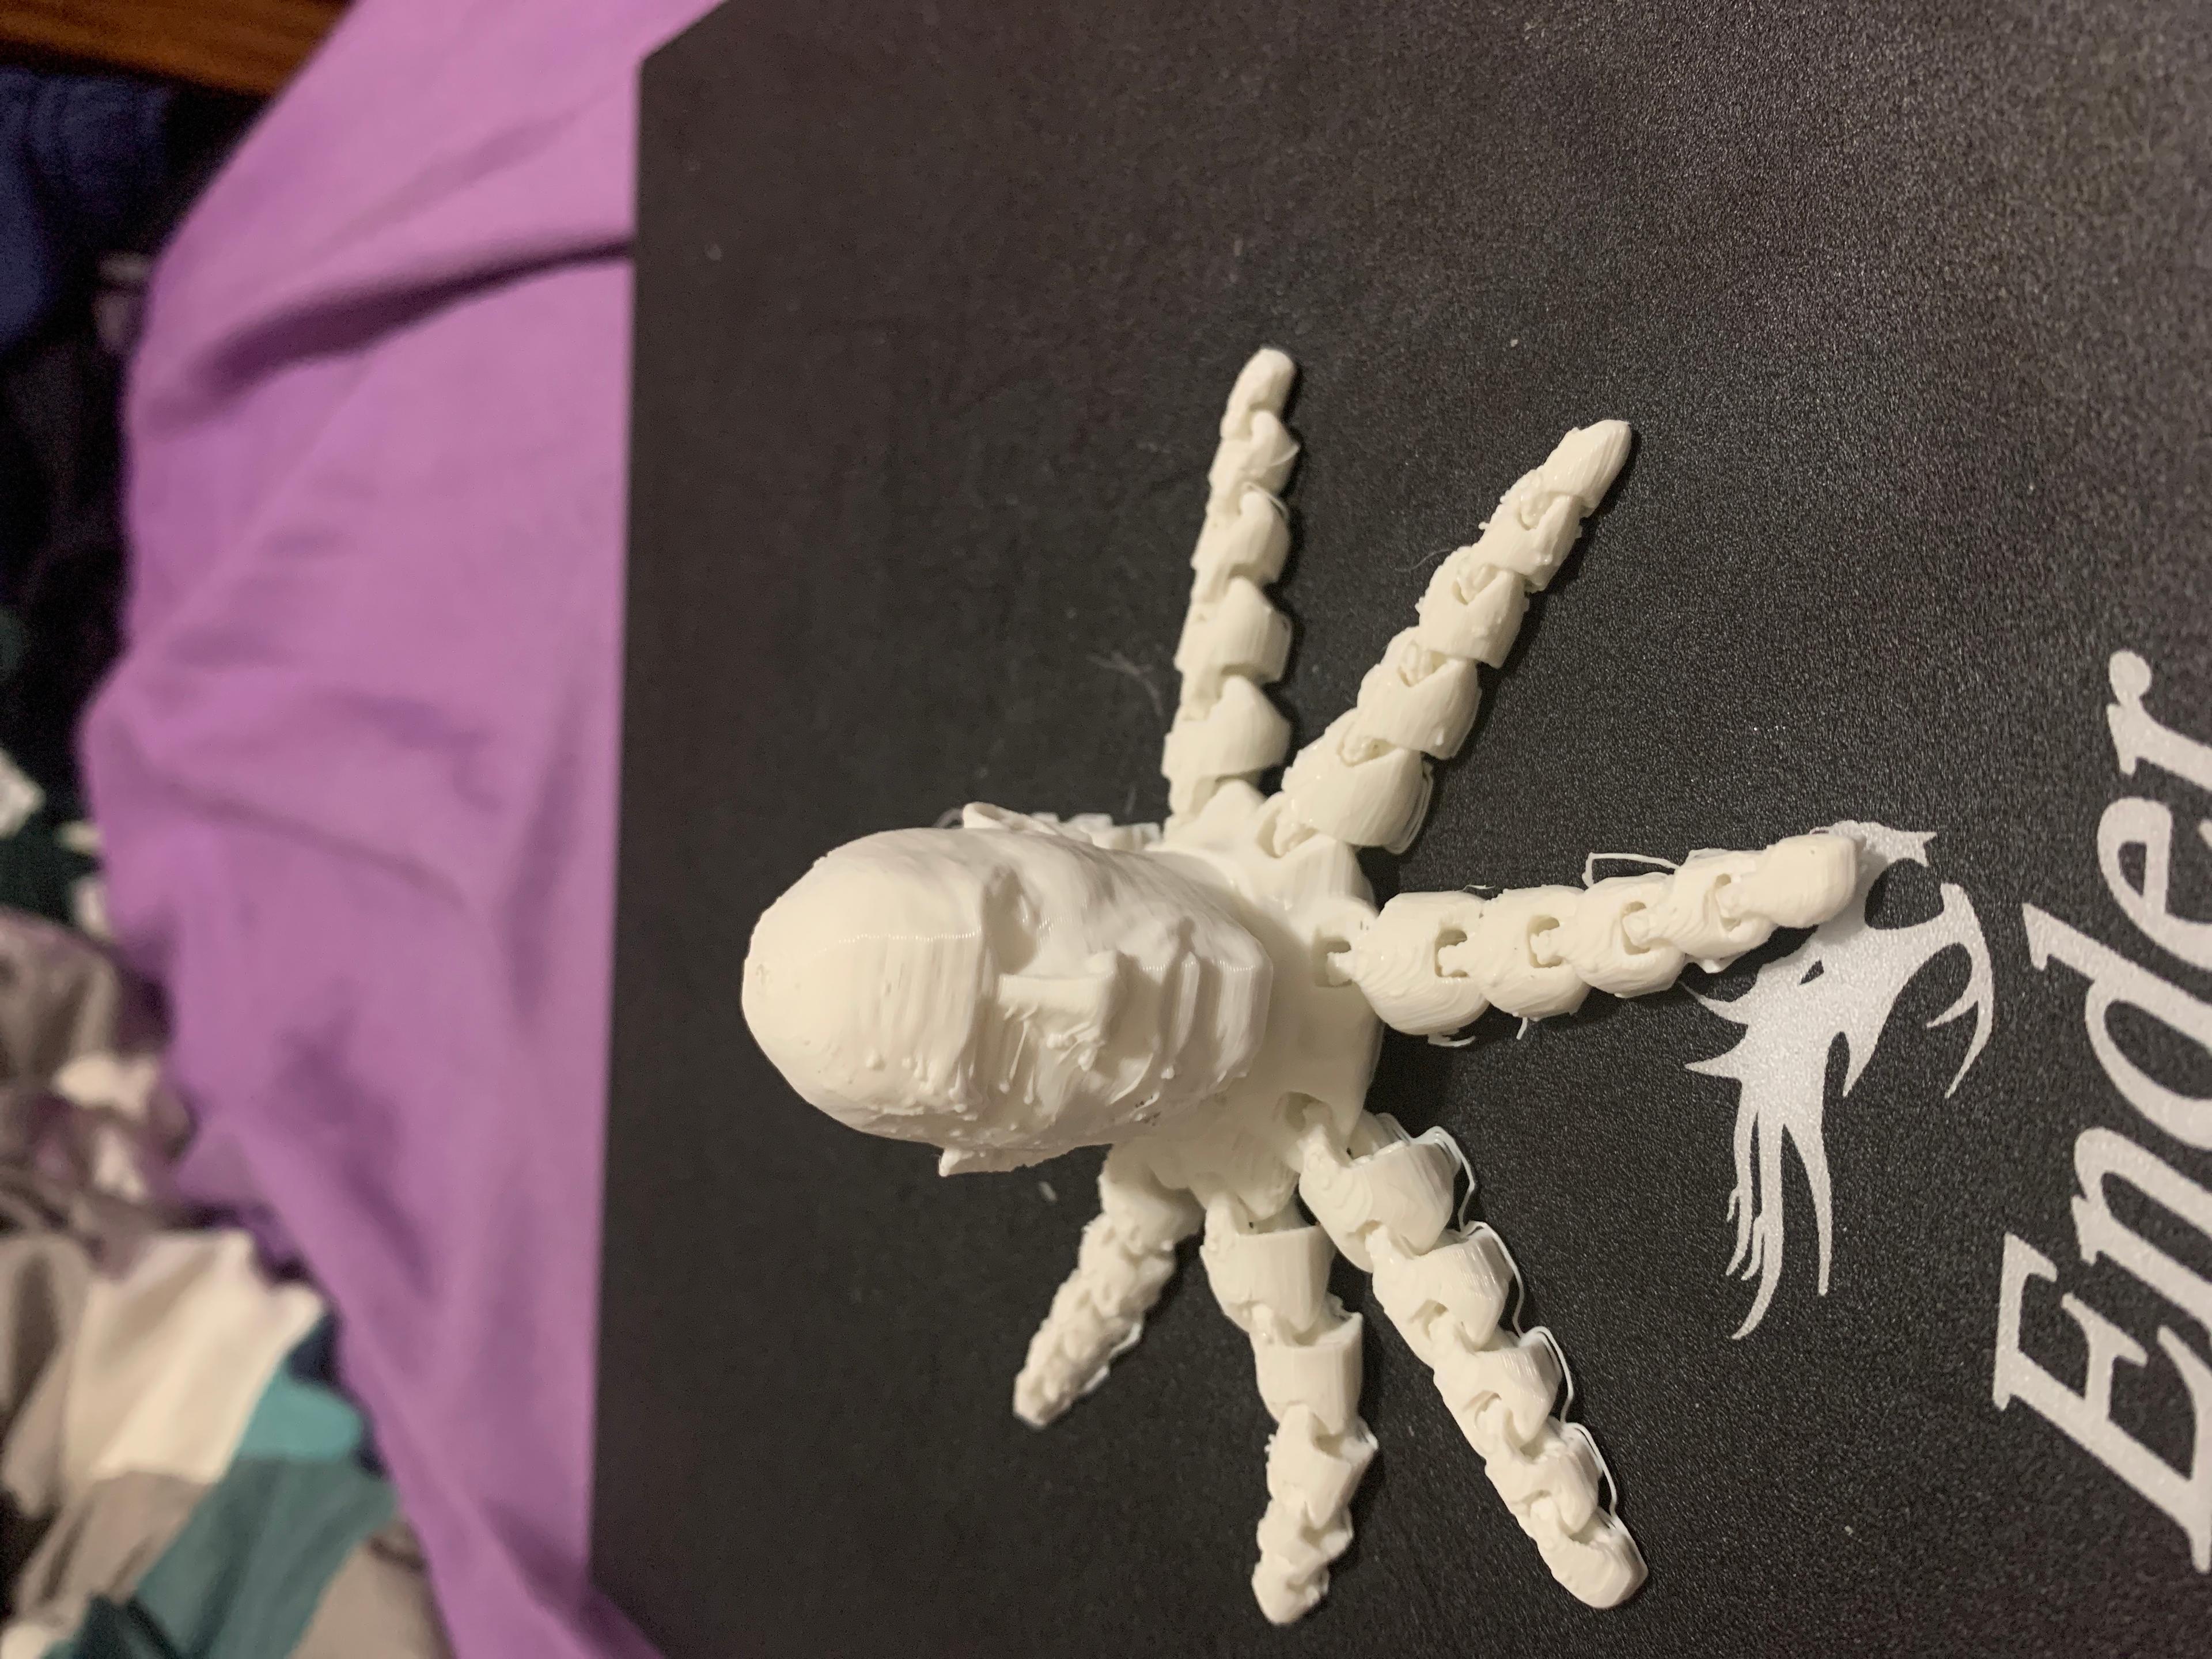 ROCKTOPUS - This came out great - 3d model